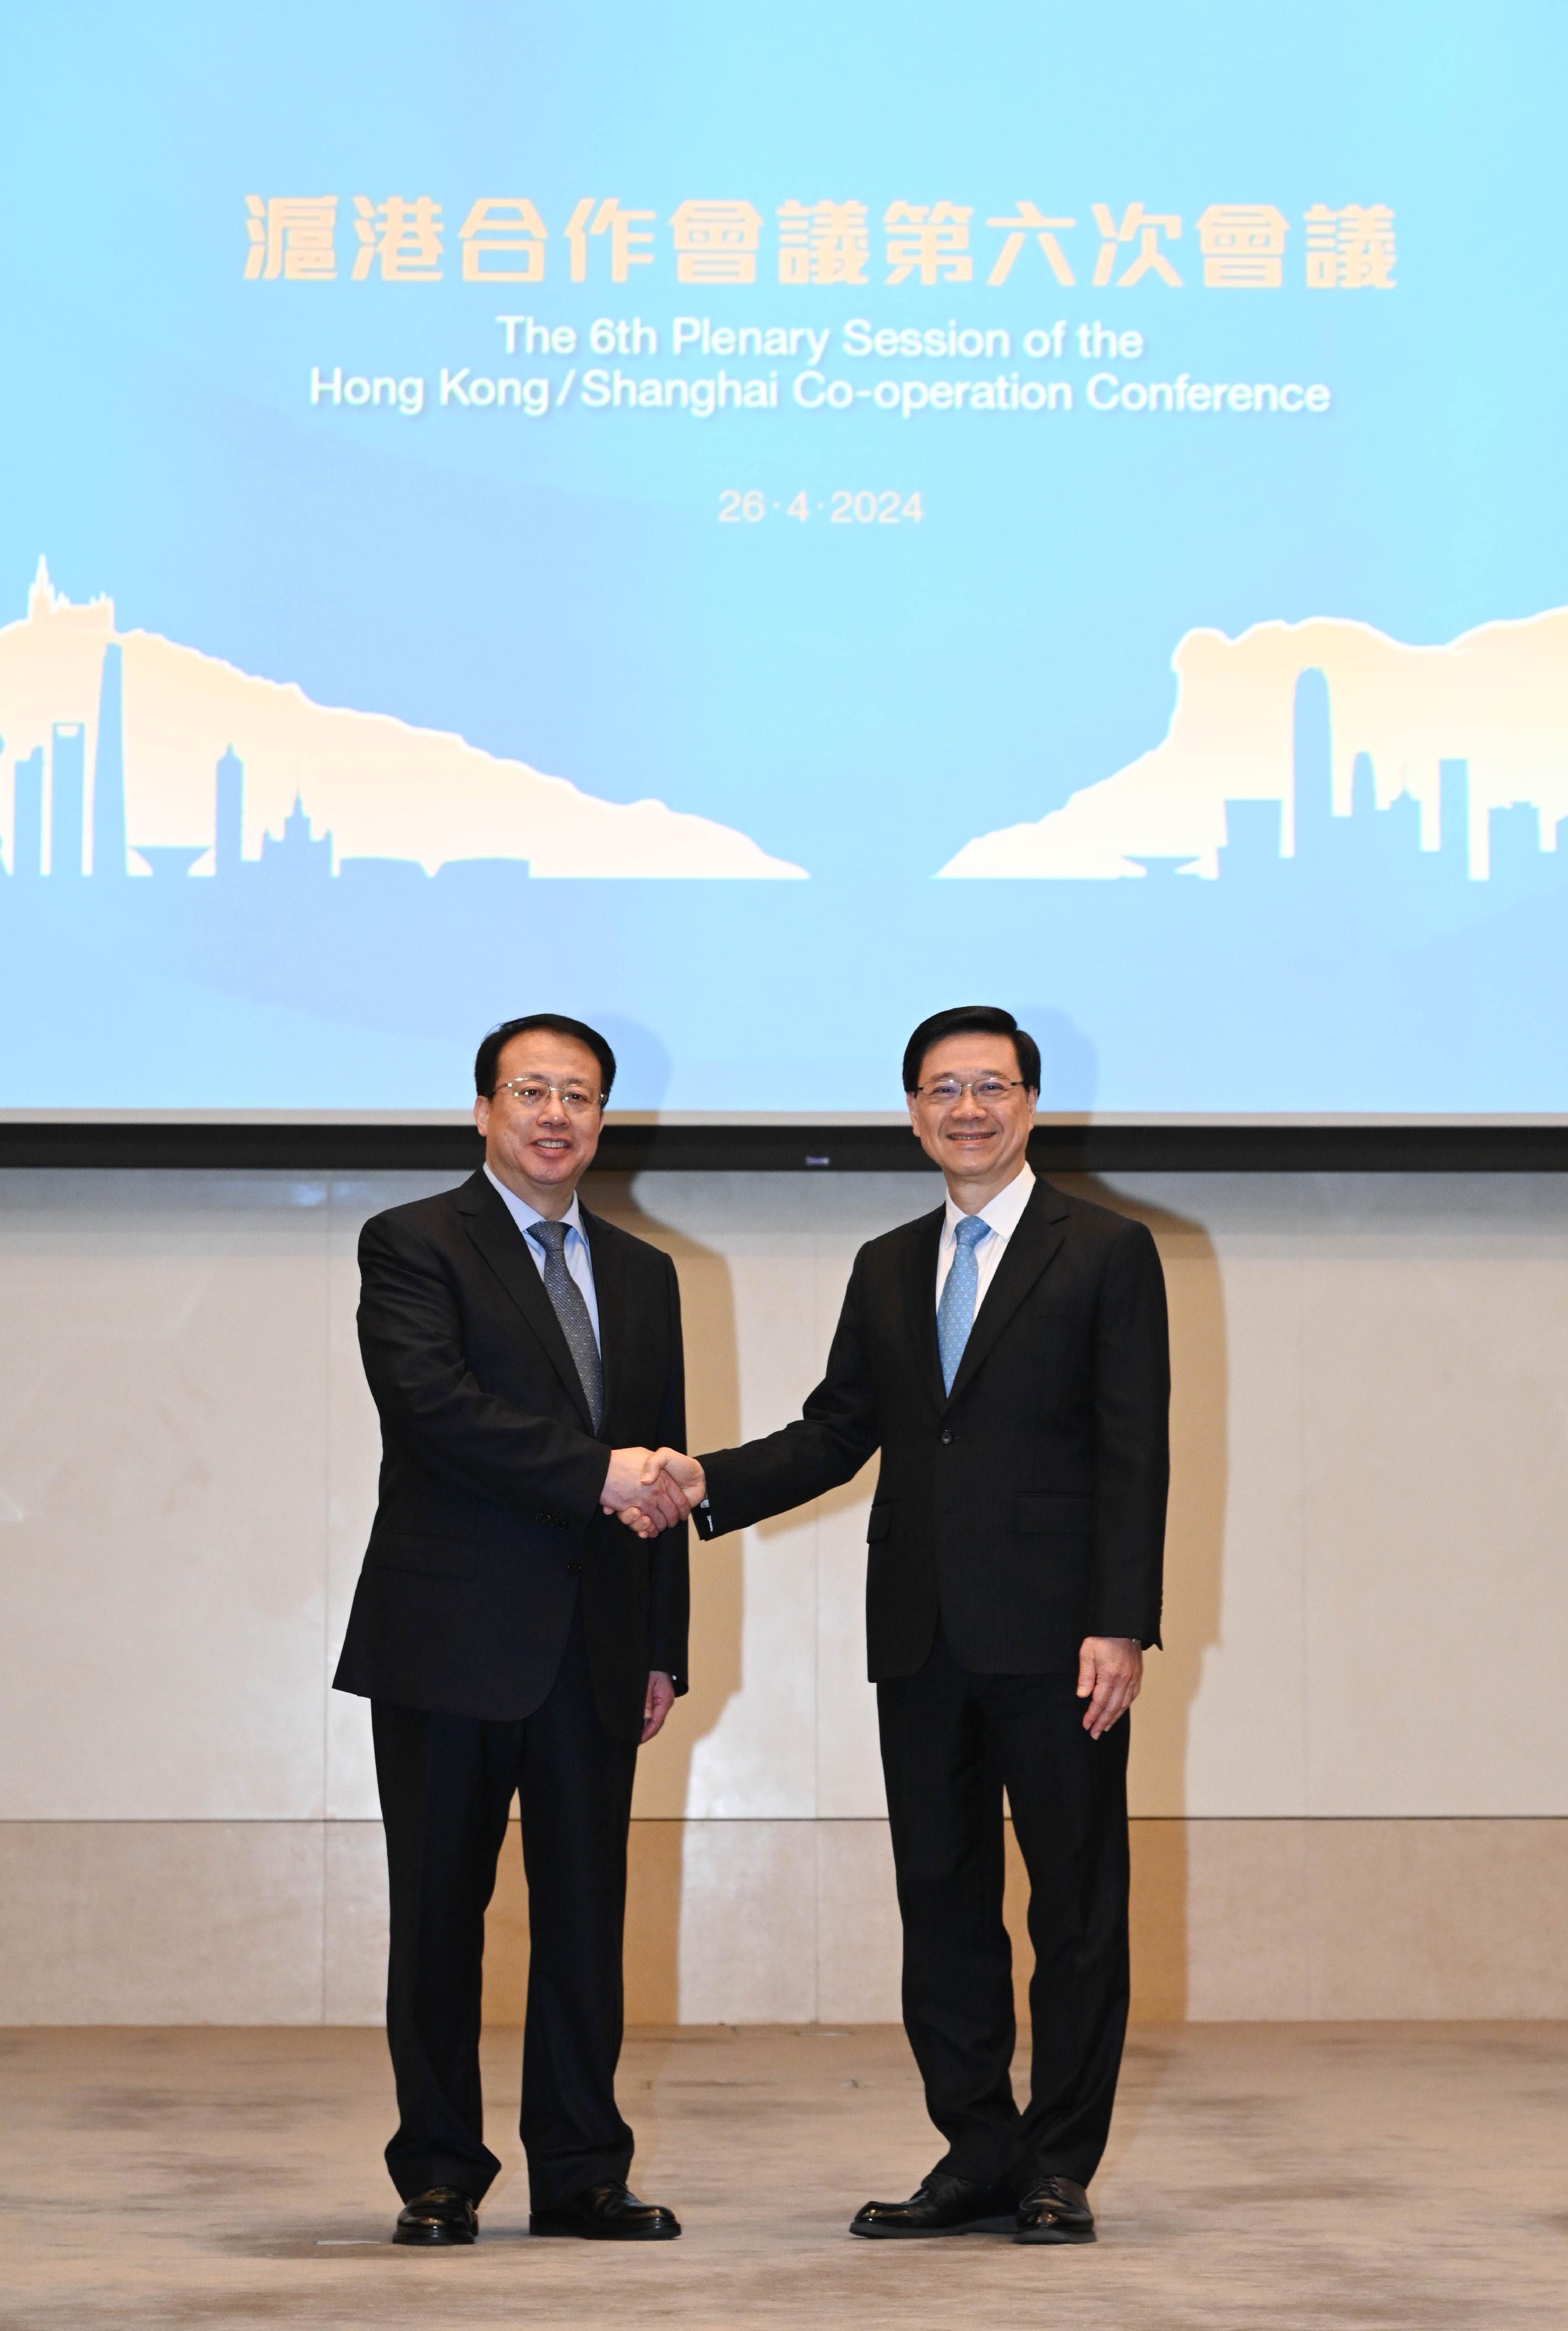 The Chief Executive, Mr John Lee, led a Hong Kong Special Administrative Region Government delegation to attend the 6th Plenary Session of the Hong Kong/Shanghai Co-operation Conference in the Central Government Offices today (April 26). Photo shows Mr Lee (right) and the Mayor of Shanghai, Mr Gong Zheng (left), shaking hands before the Plenary.
